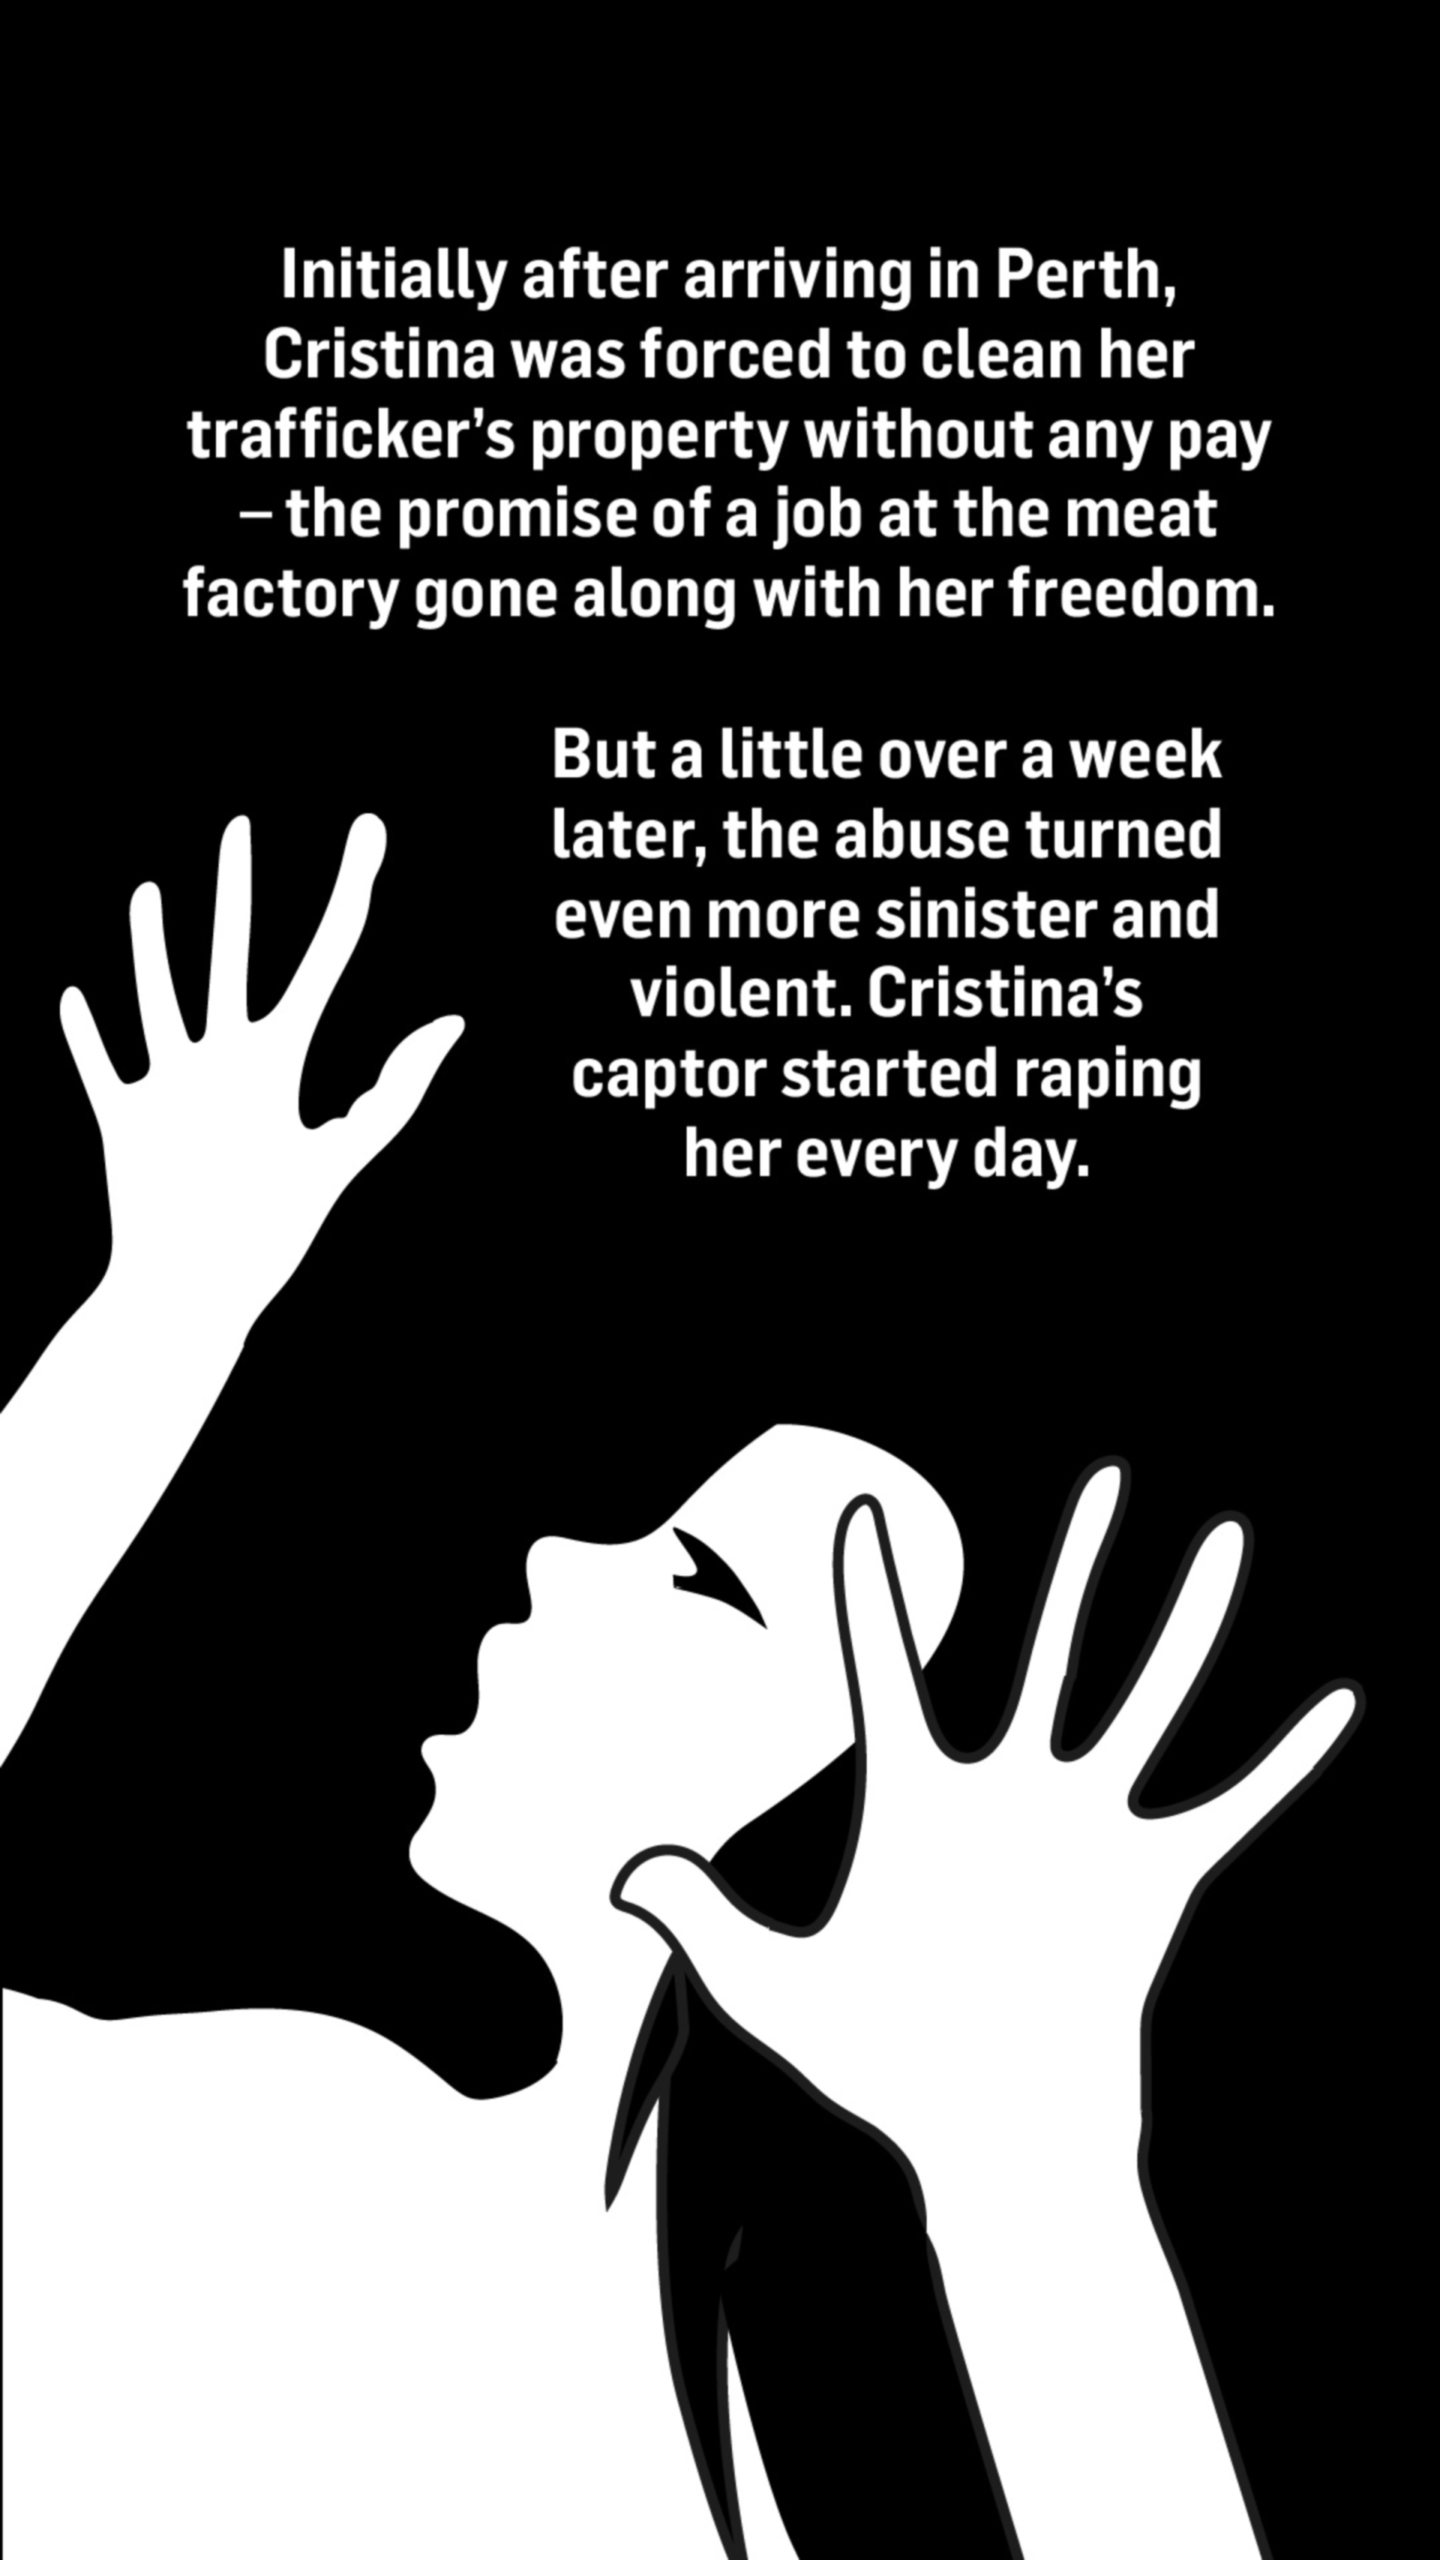 An illustration of a woman holding her hands up in the air looking scared. Words above the image read: Initially after arriving in Perth, Cristina was forced to clean her trafficker's property without any pay - the promise of a job at the meat factory gone along with her freedom.

But a little over a week later, the abuse turned even more sinister and violent.

Cristina's captor started raping her every day.